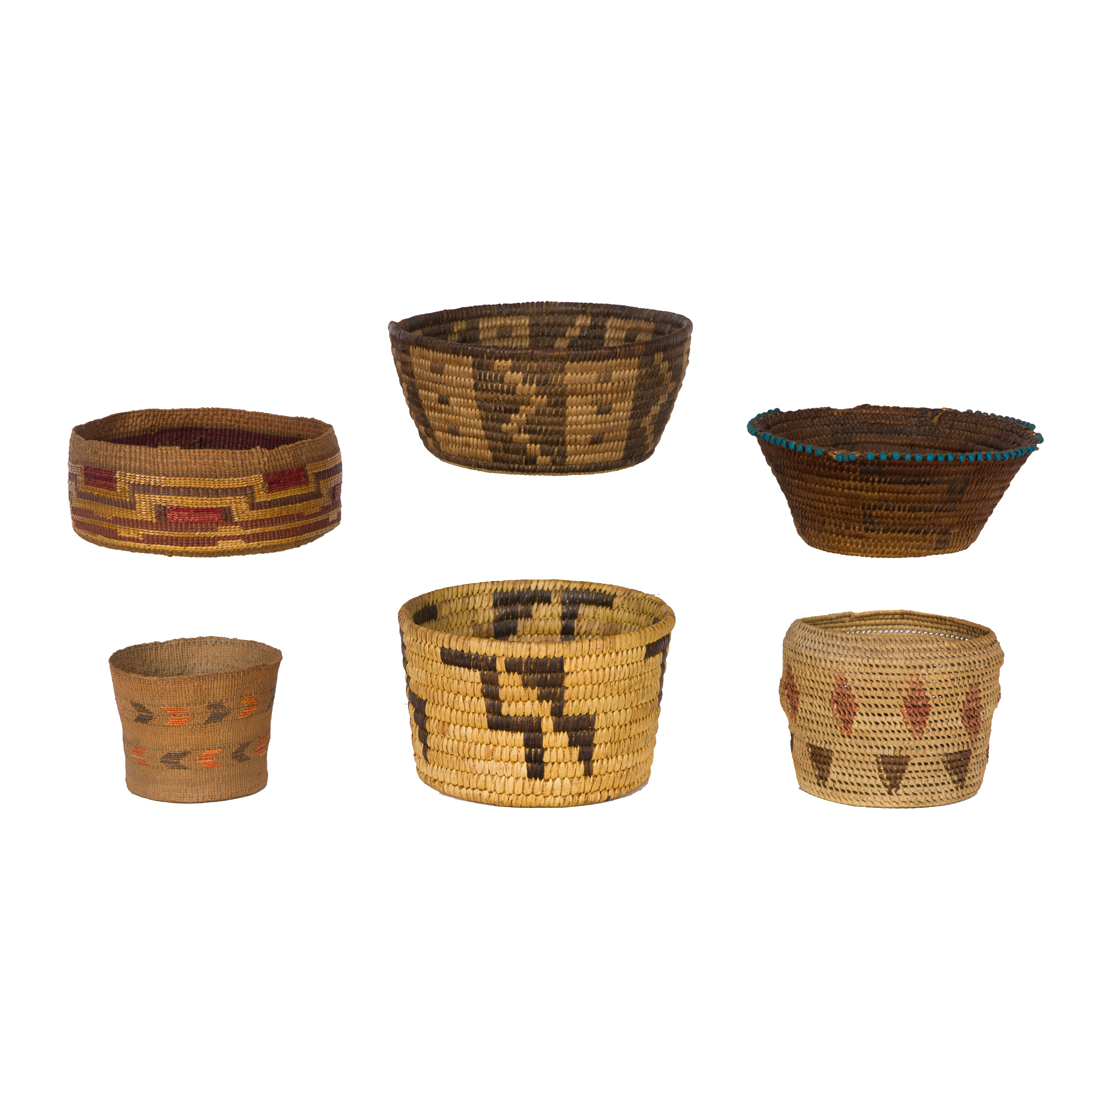  LOT OF 5 BASKETRY GROUP INCLUDING 2d11a0